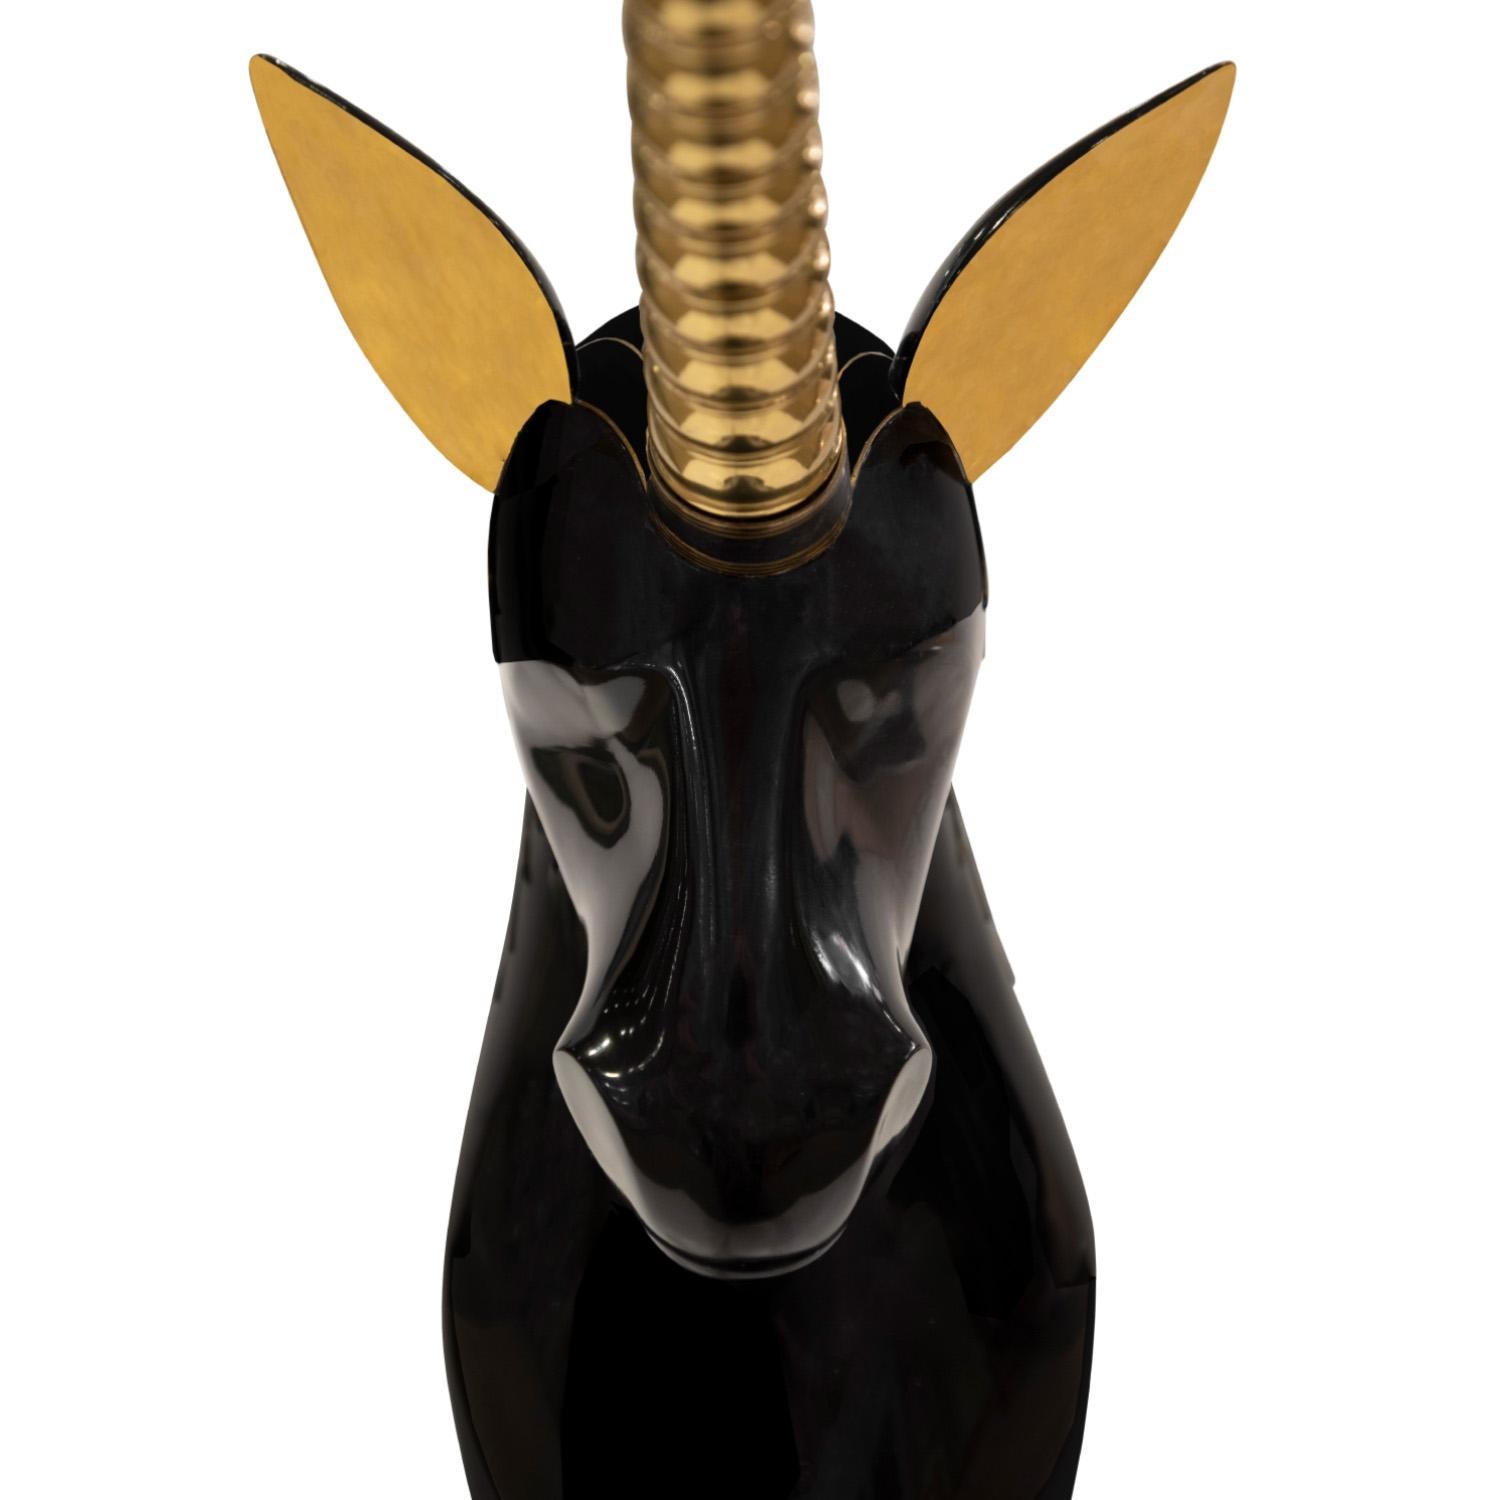 Modern Roberto Estevez Incredible Large Unicorn Sculpture 1979 'Signed and Numbered' For Sale